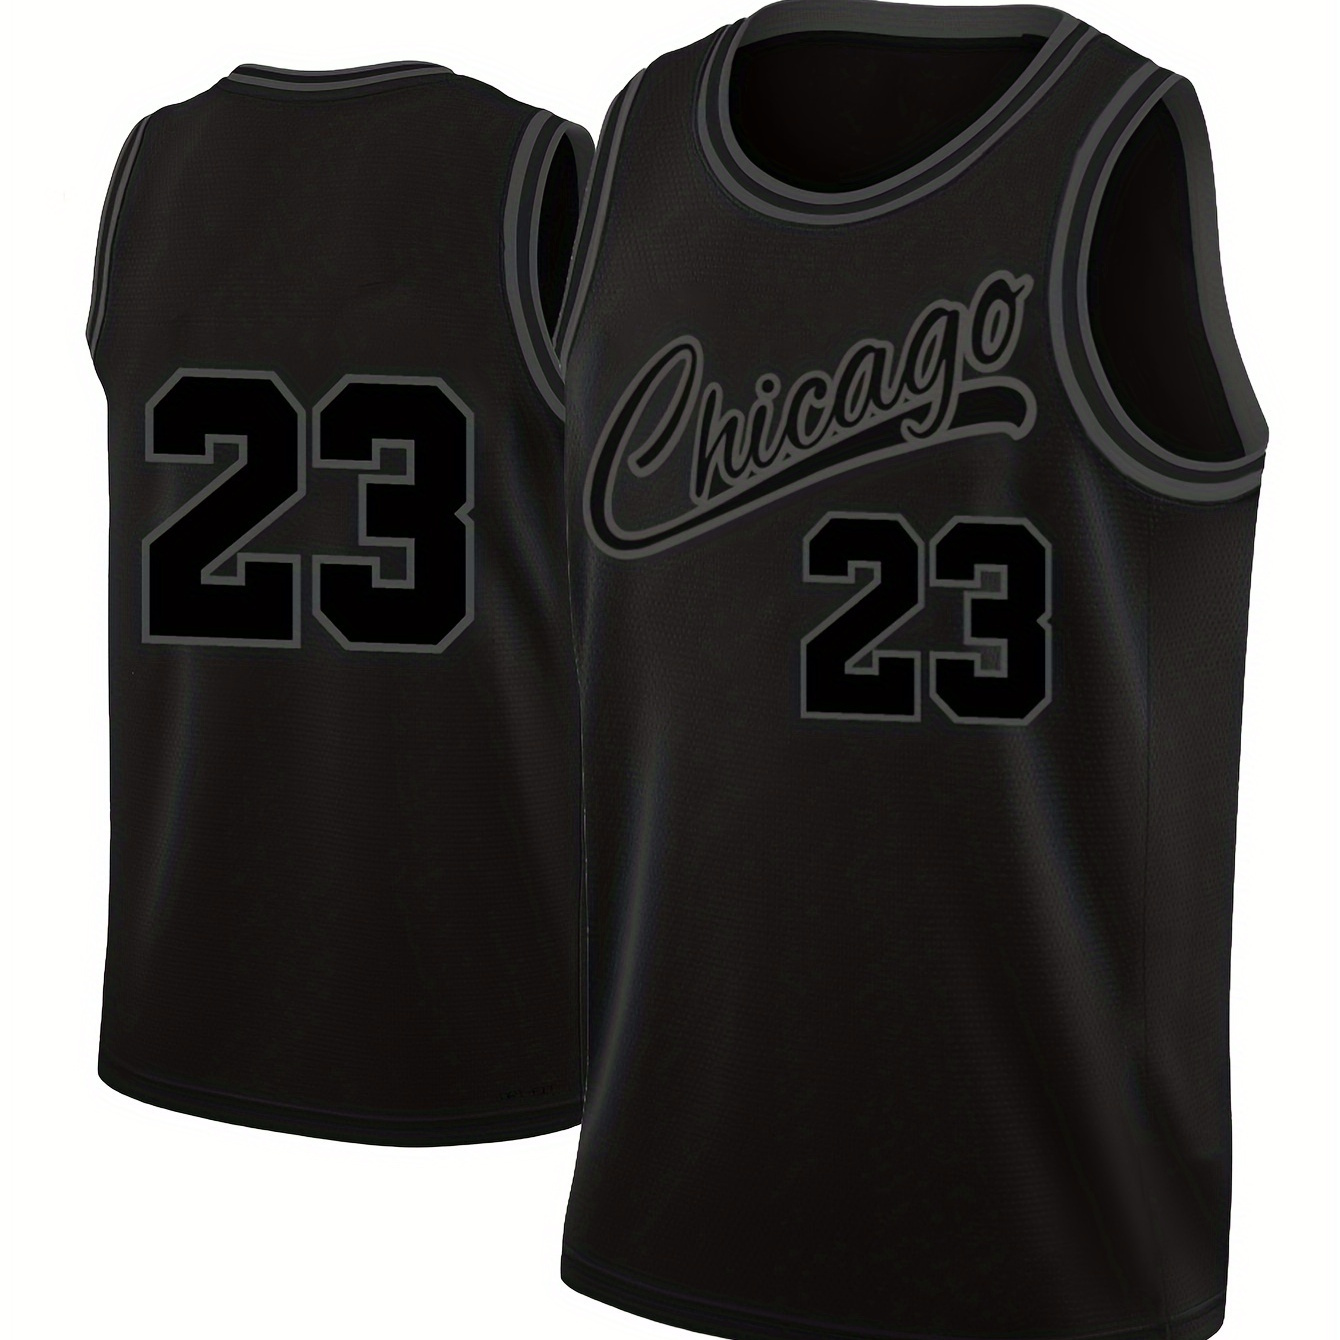 

Men's Chicago 23 Basketball Jersey, Retro Embroidery Sleeveless Round Neck Training Basketball Uniform, Matches And Games